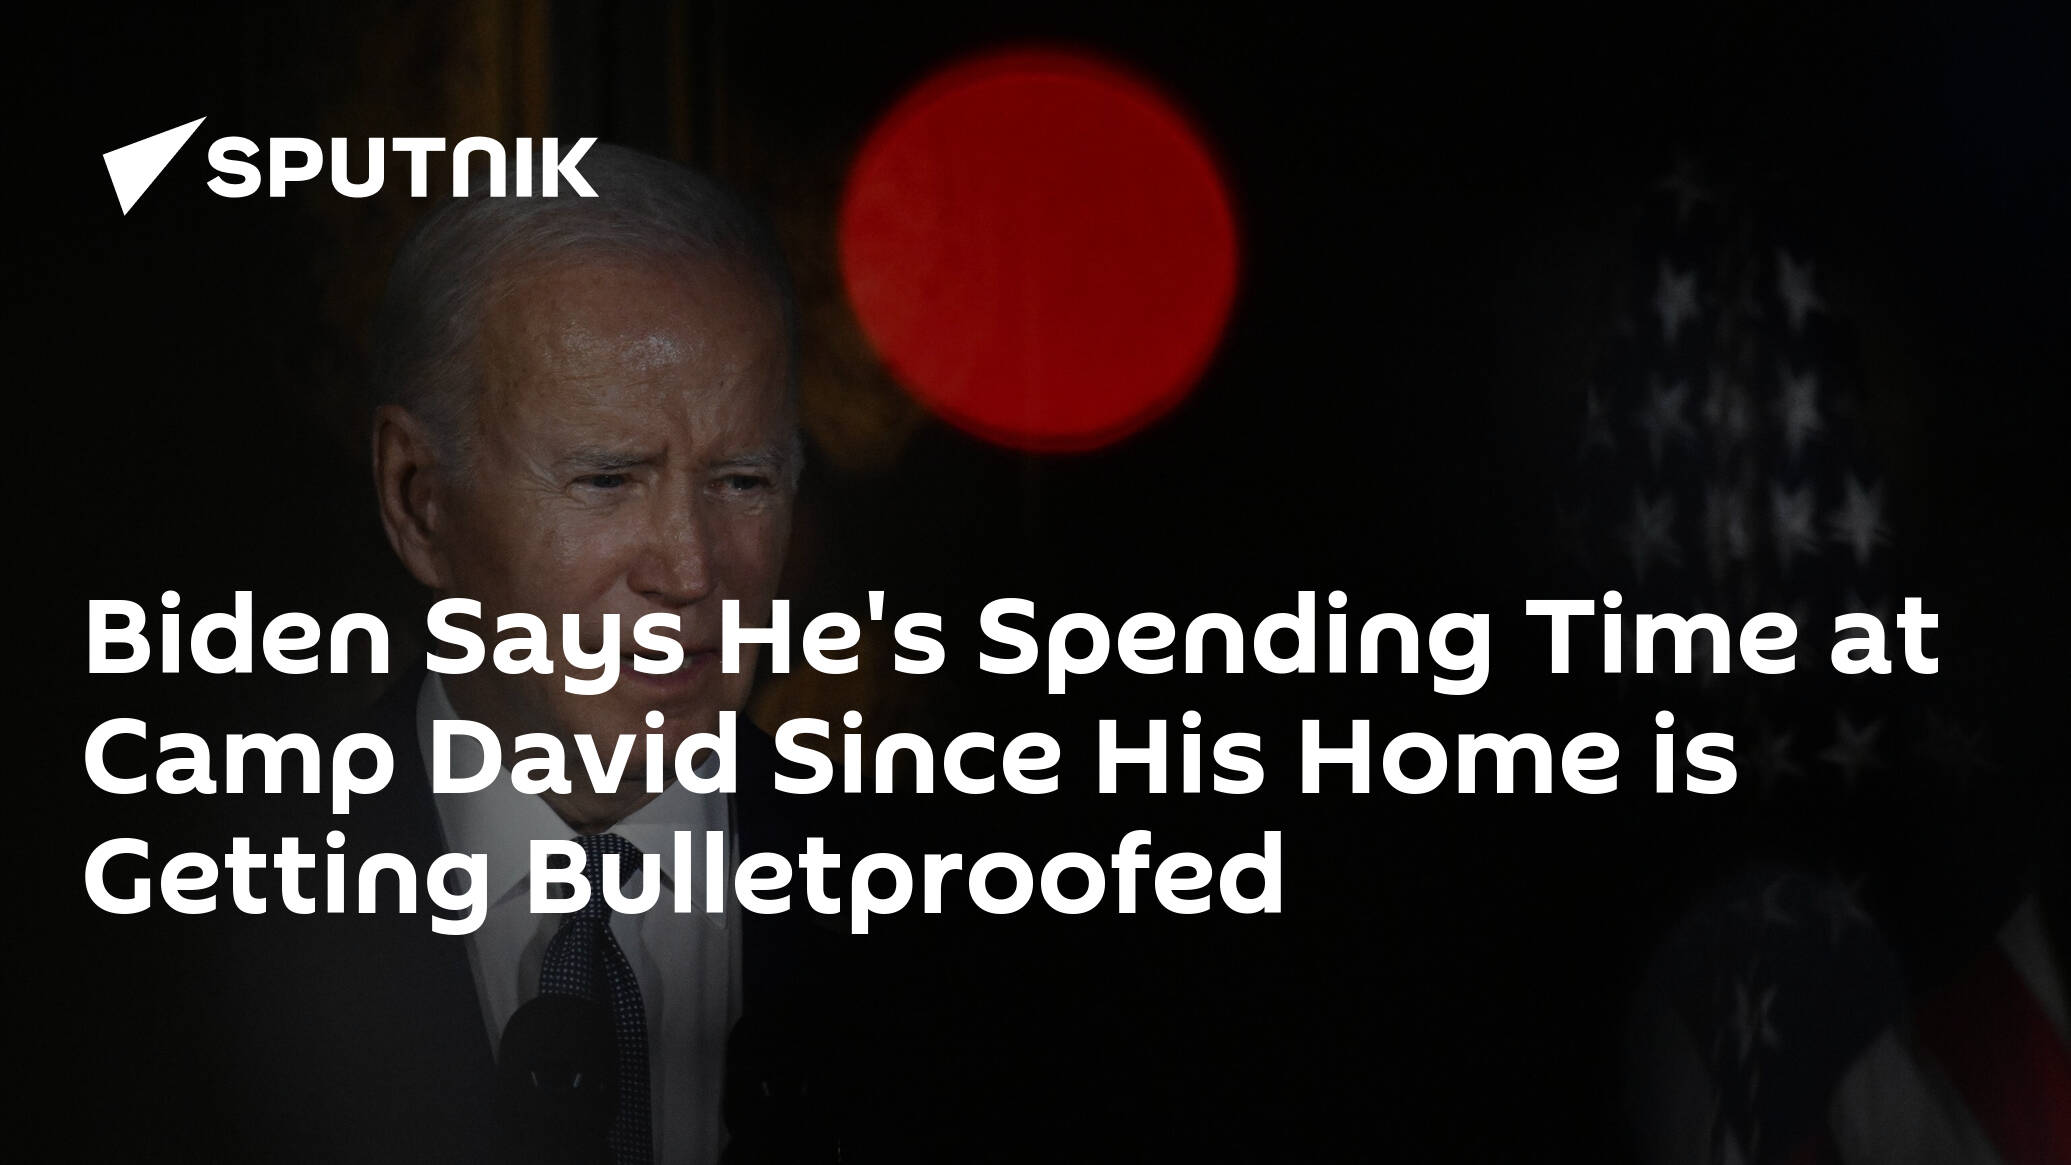 Biden Says He's Spending Time at Camp David Since His Home is Getting Bulletproofed